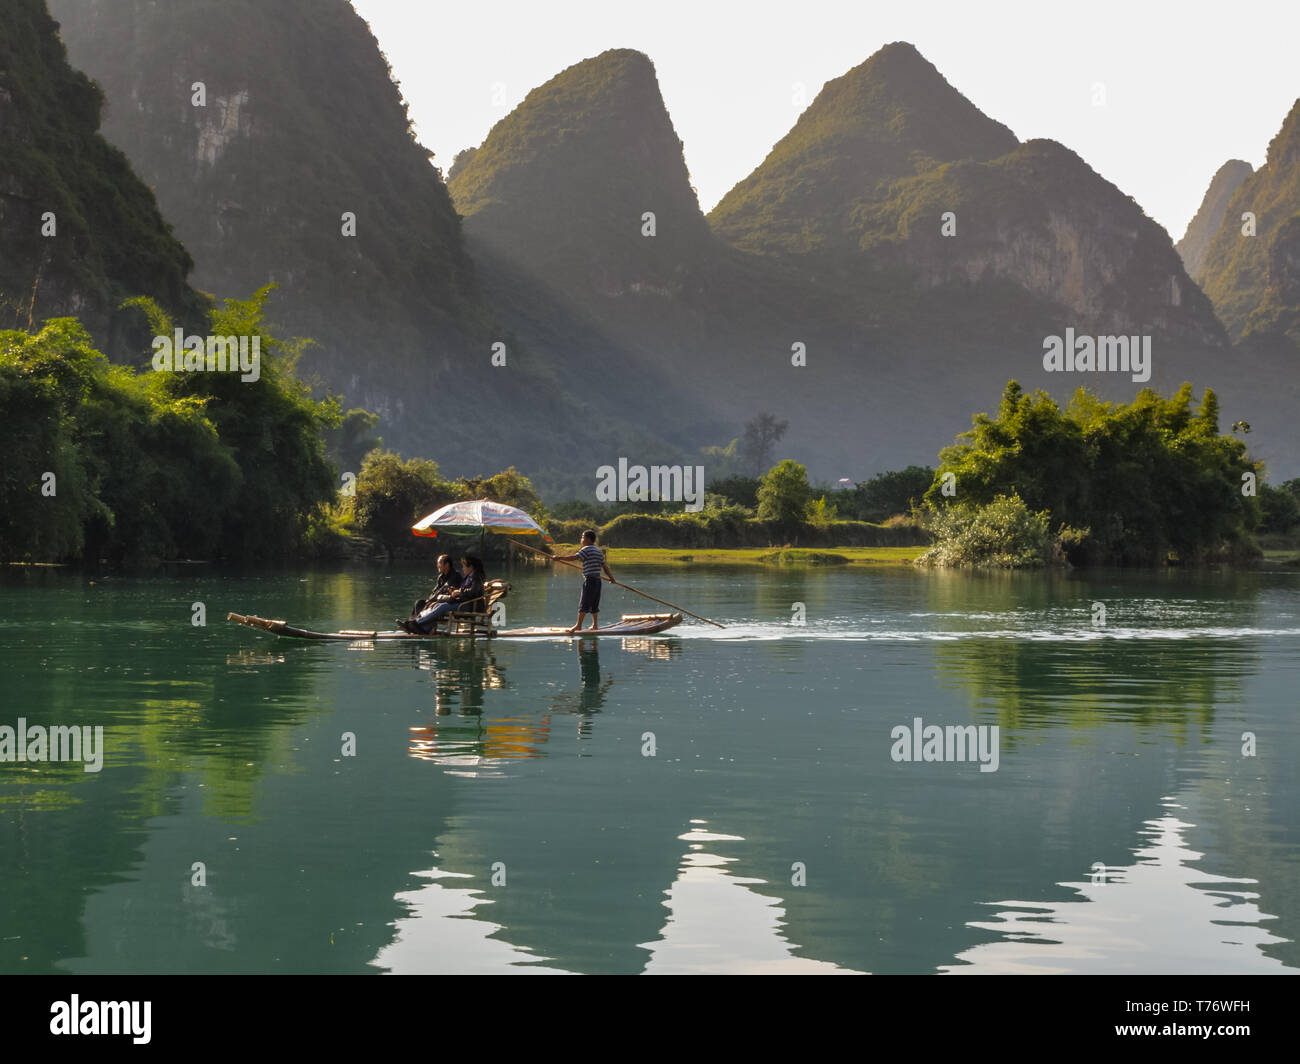 Tourists ride on raft paddled  down river to see the sights in Yangshao valley, China Stock Photo